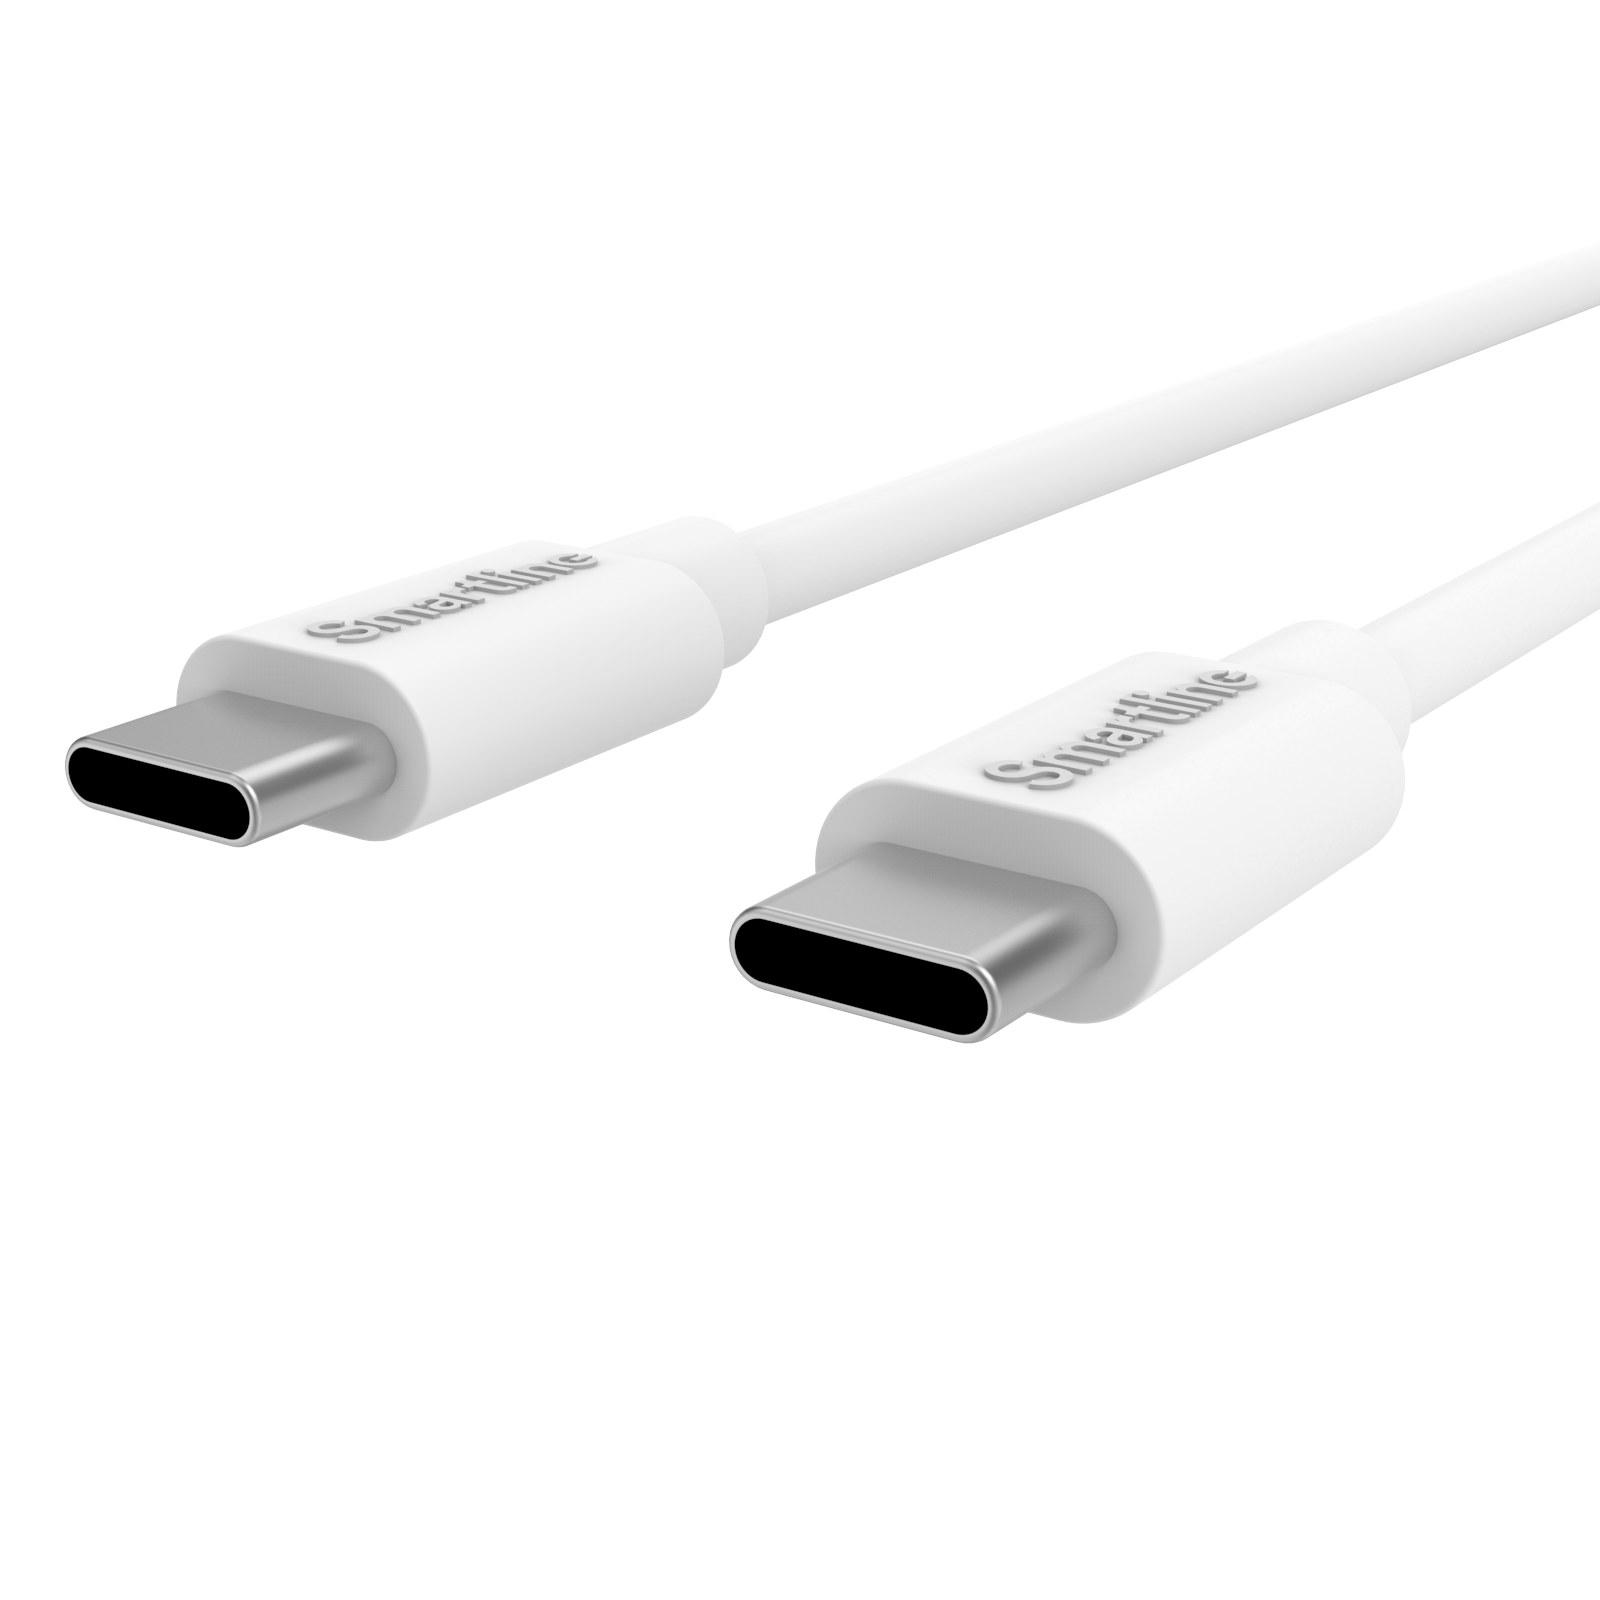 Complete Charger for Nokia phones - 2m Cable and Wall Charger USB-C - Smartline